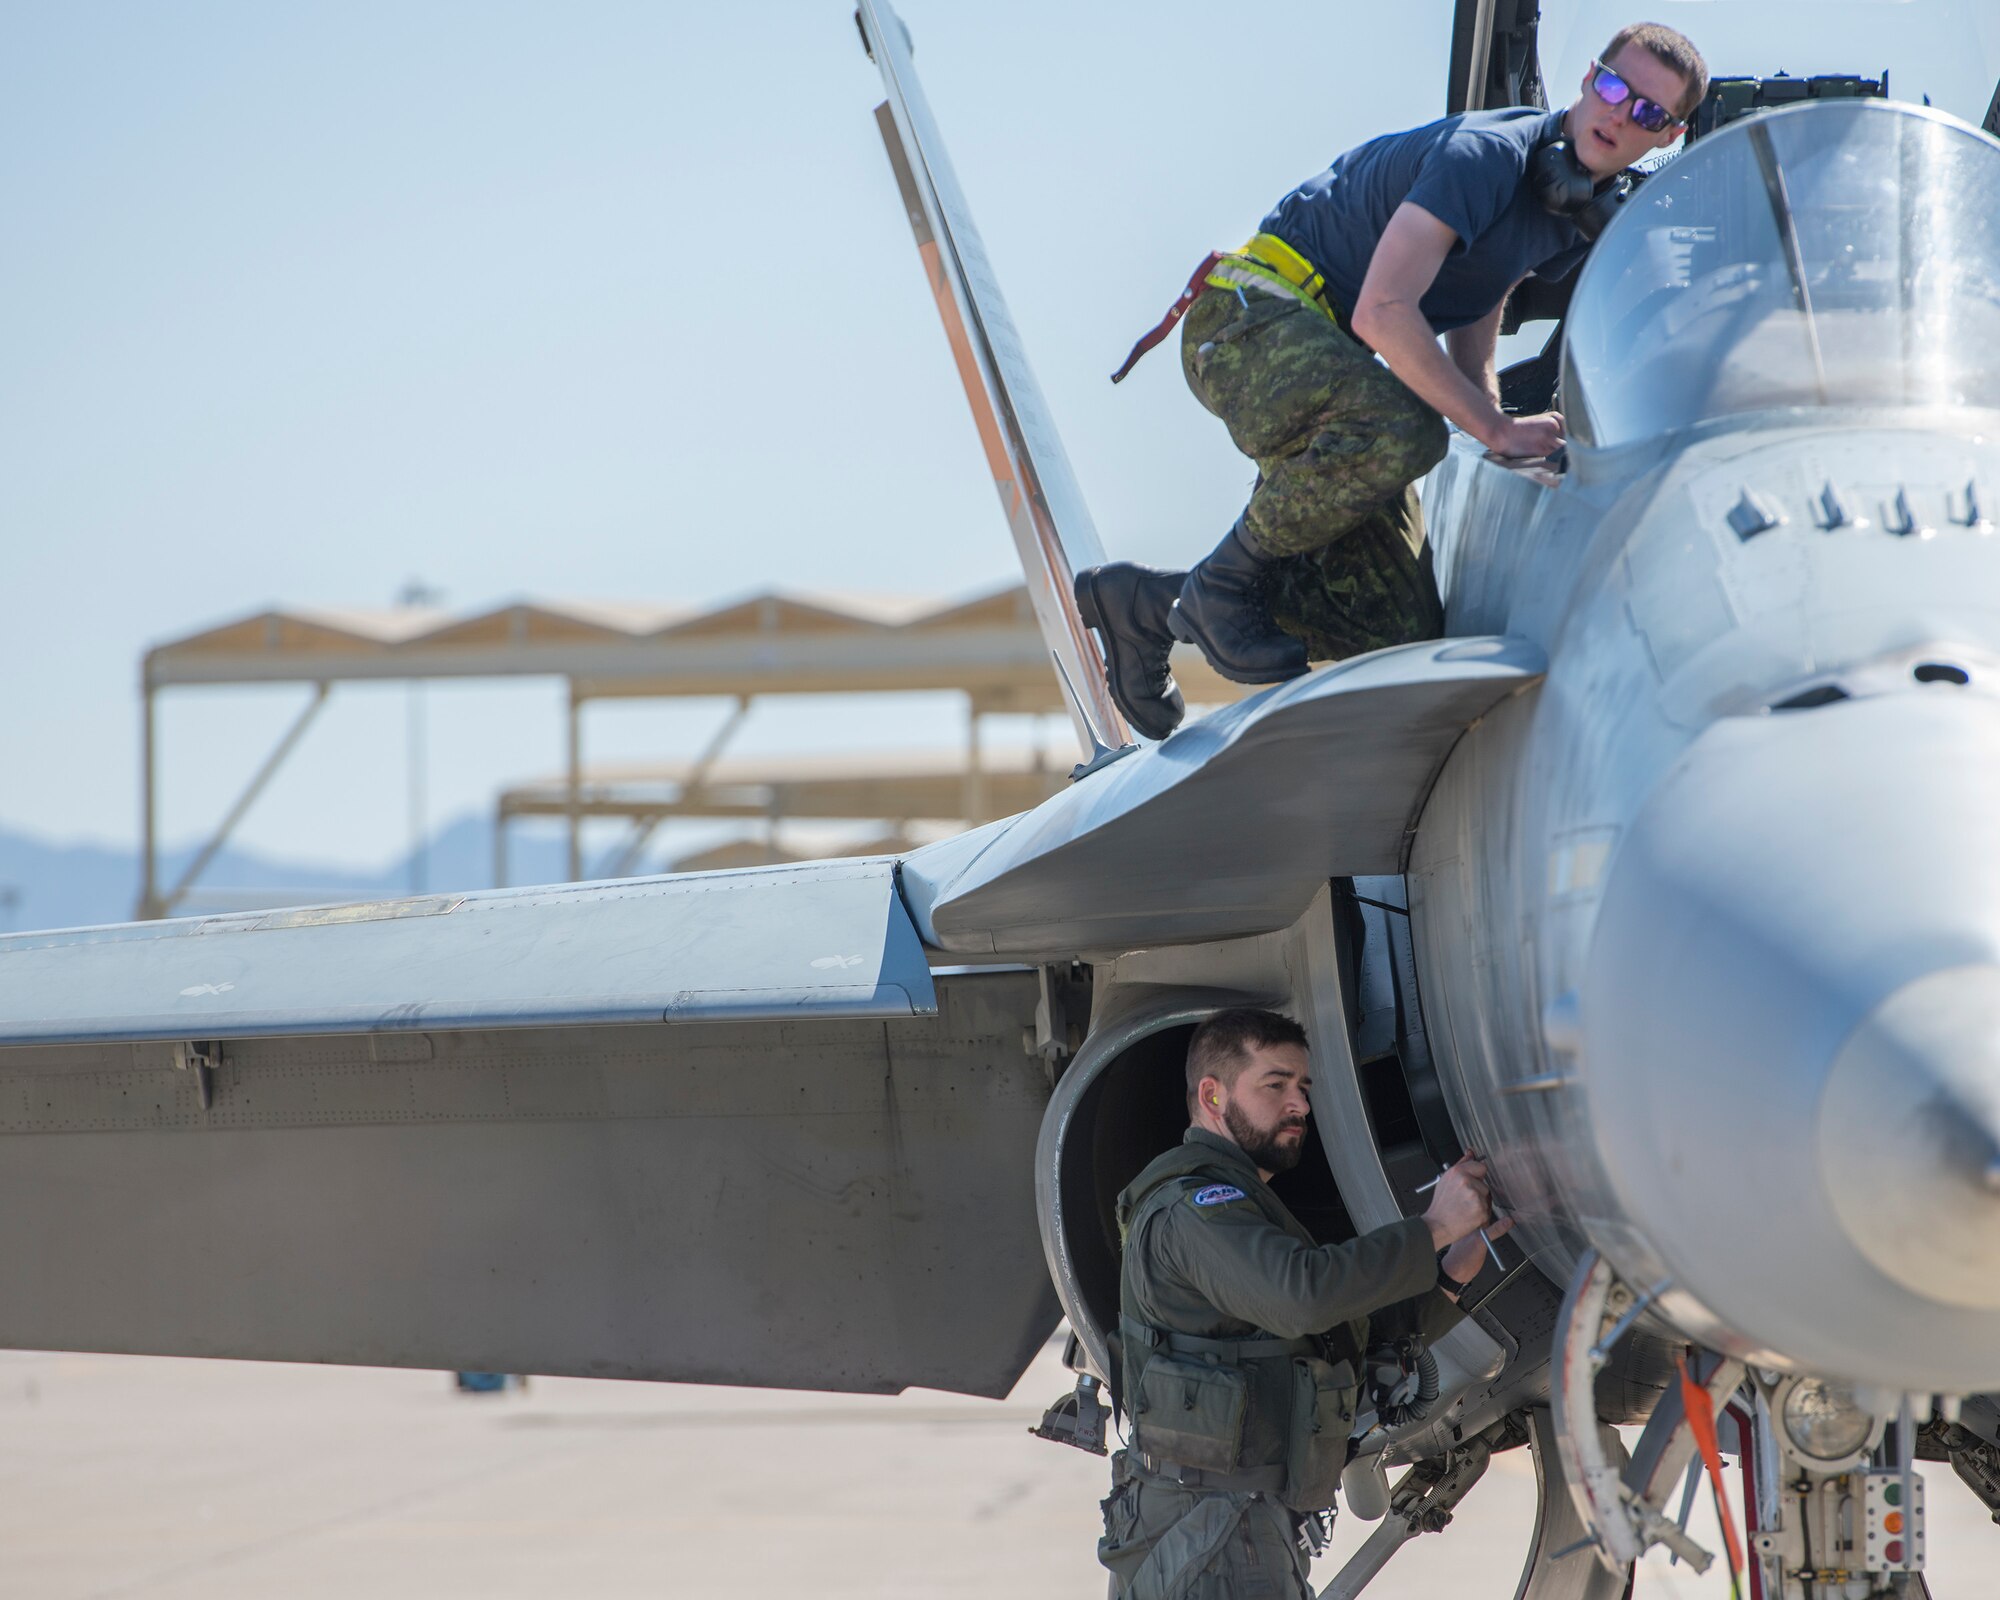 A Royal Canadian air force pilot and crew chief, assigned to the 433rd Tactical Fighter Squadron in Canadian Forces Base Bagotville, Quebec, Canada, prepare a CF-18 Hornet for flight Feb. 25, 2020, at Luke Air Force Base, Ariz.